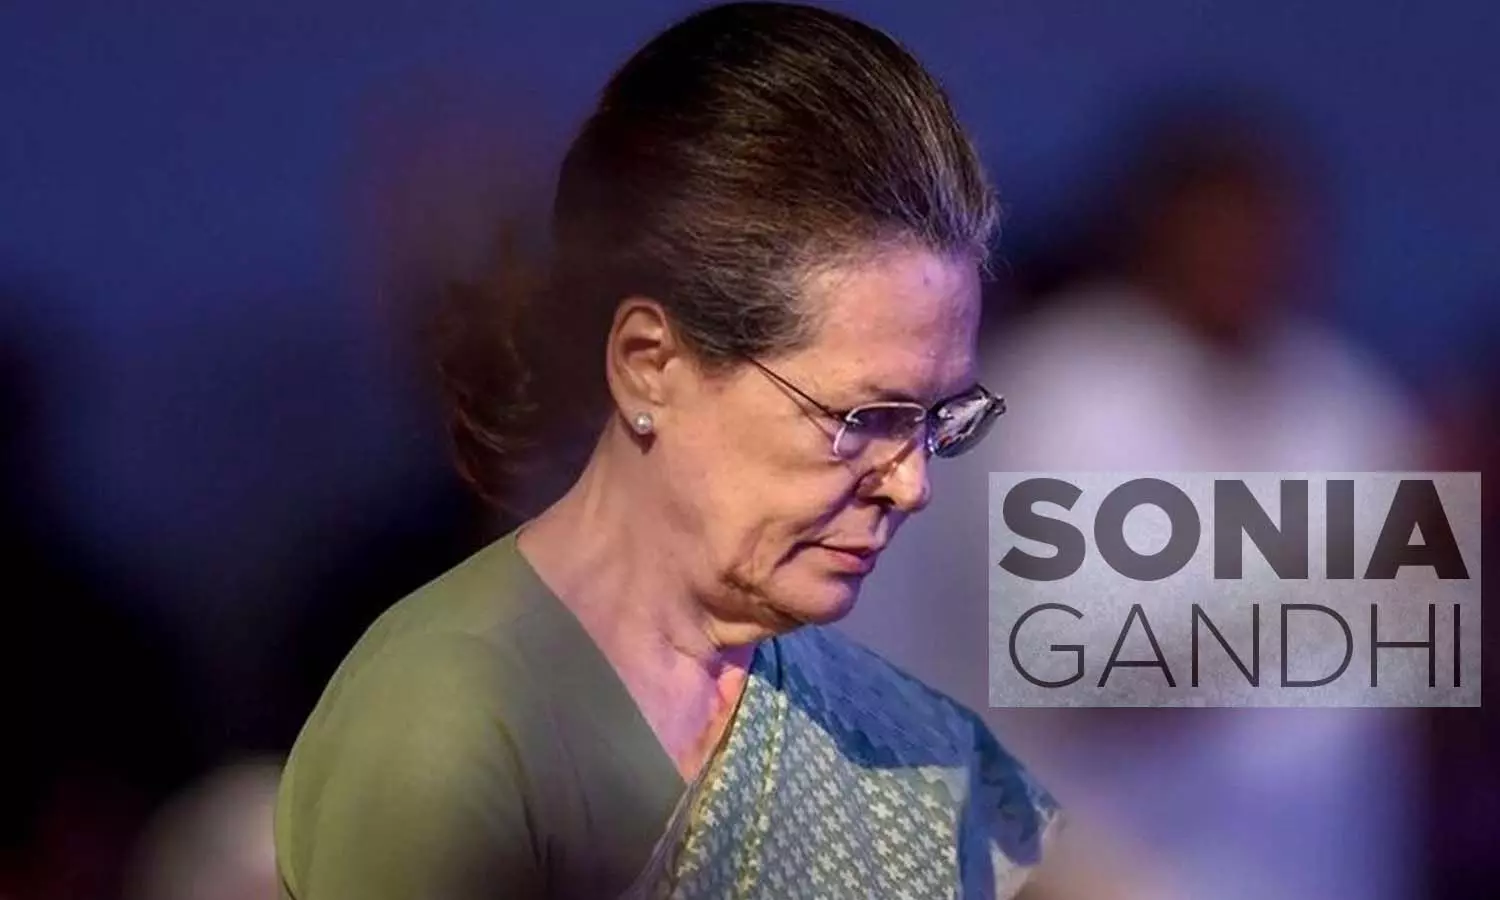 Sonia Gandhi was the Congress President for the longest time